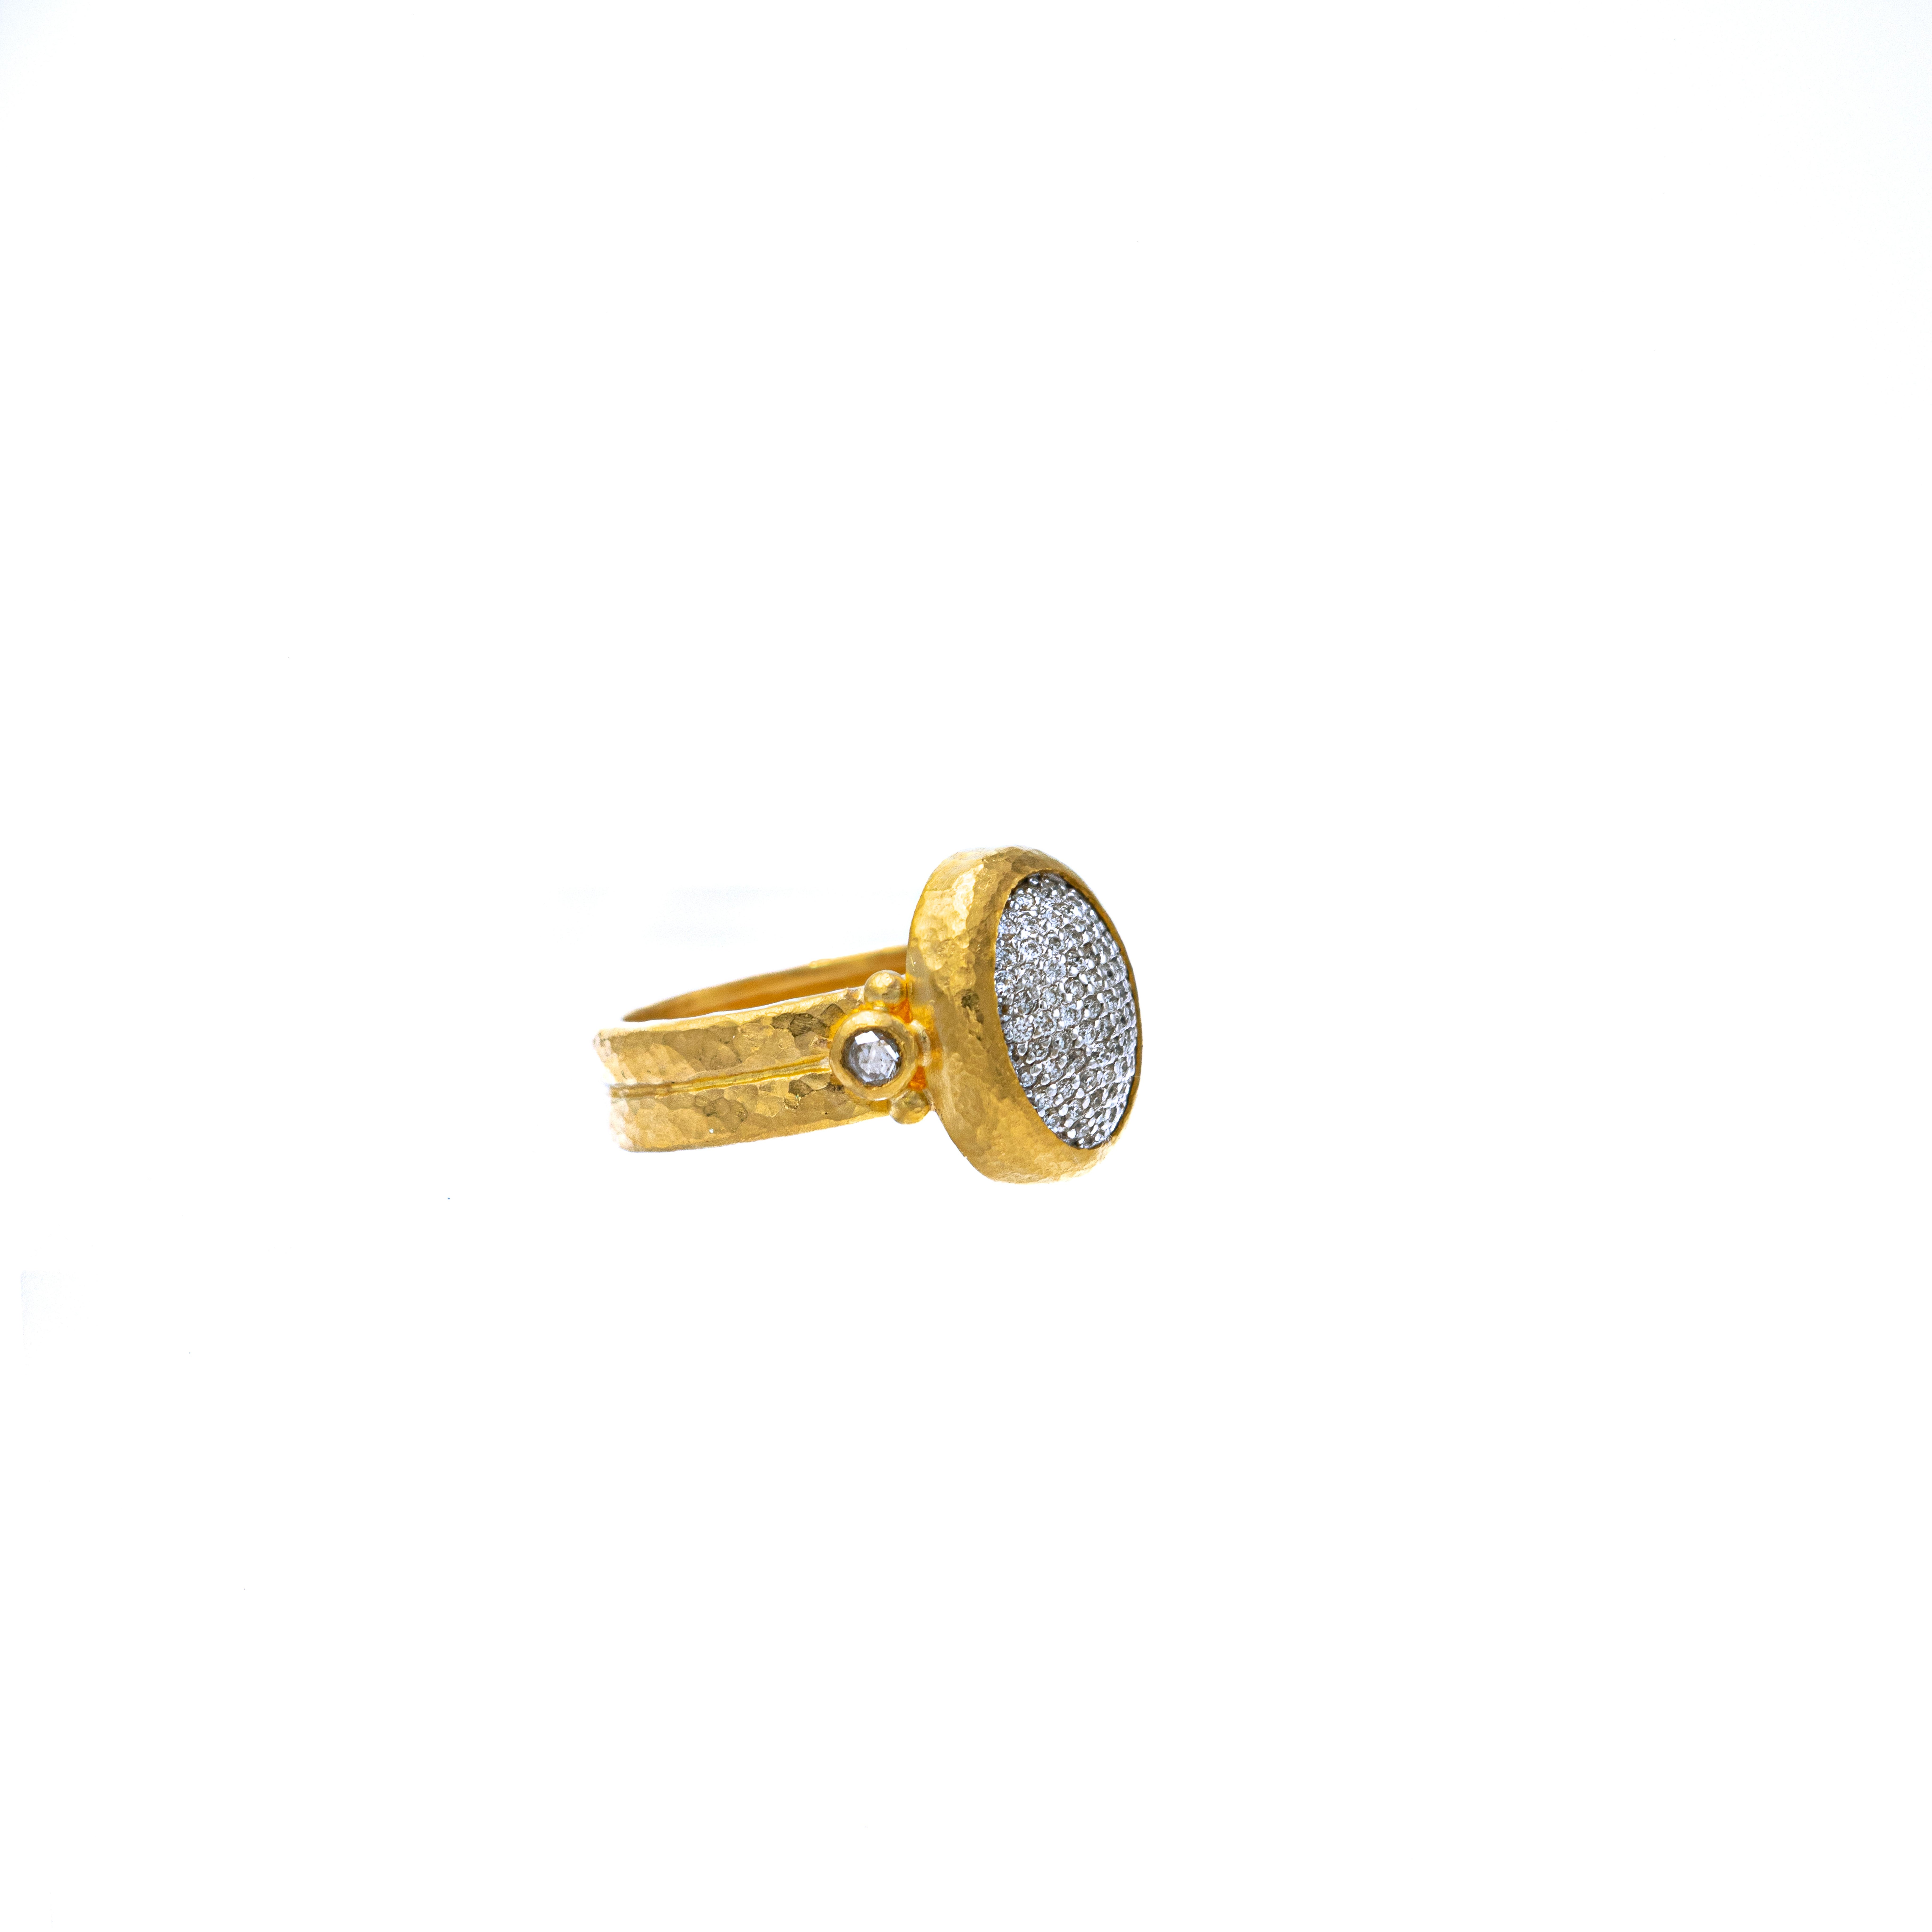 From Gurhan’s remarkable collection of handmade 24k gold treasures, inspired by the sensuality of pure gold, each jewel illuminates the golden warmth of the feminine spirit.

This vertical amulet ring features a unique design with diamond pavé, 18k